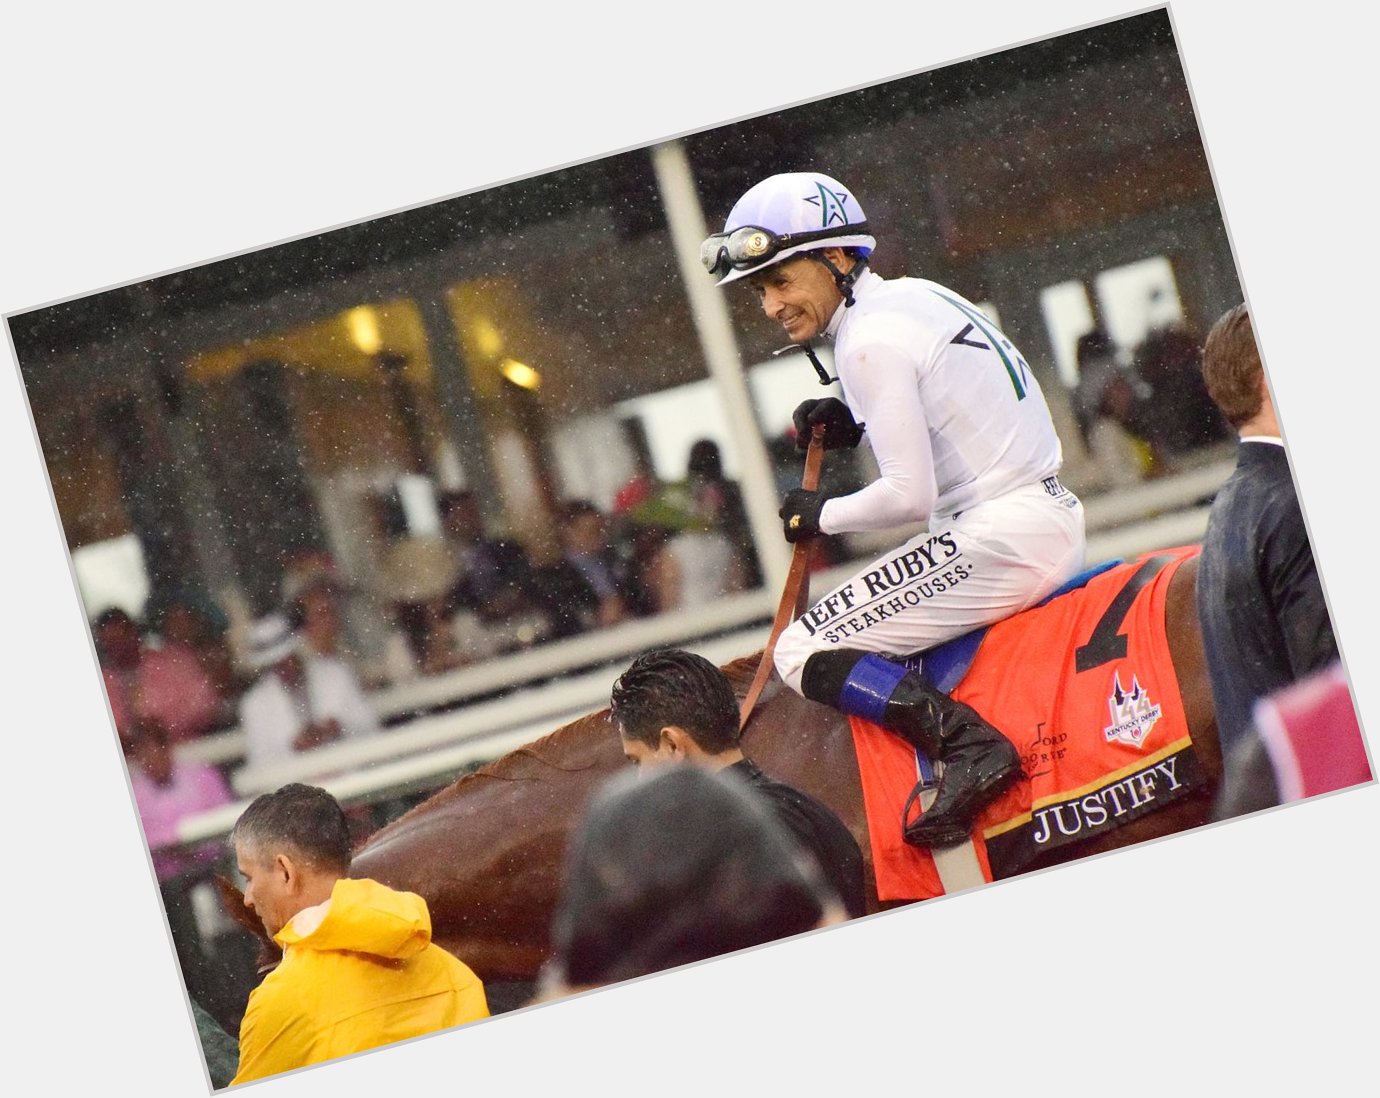 Happy birthday to Triple Crown Winning Jockey, Mike Smith. Here he is aboard Justify at the 2018 Kentucky Derby  